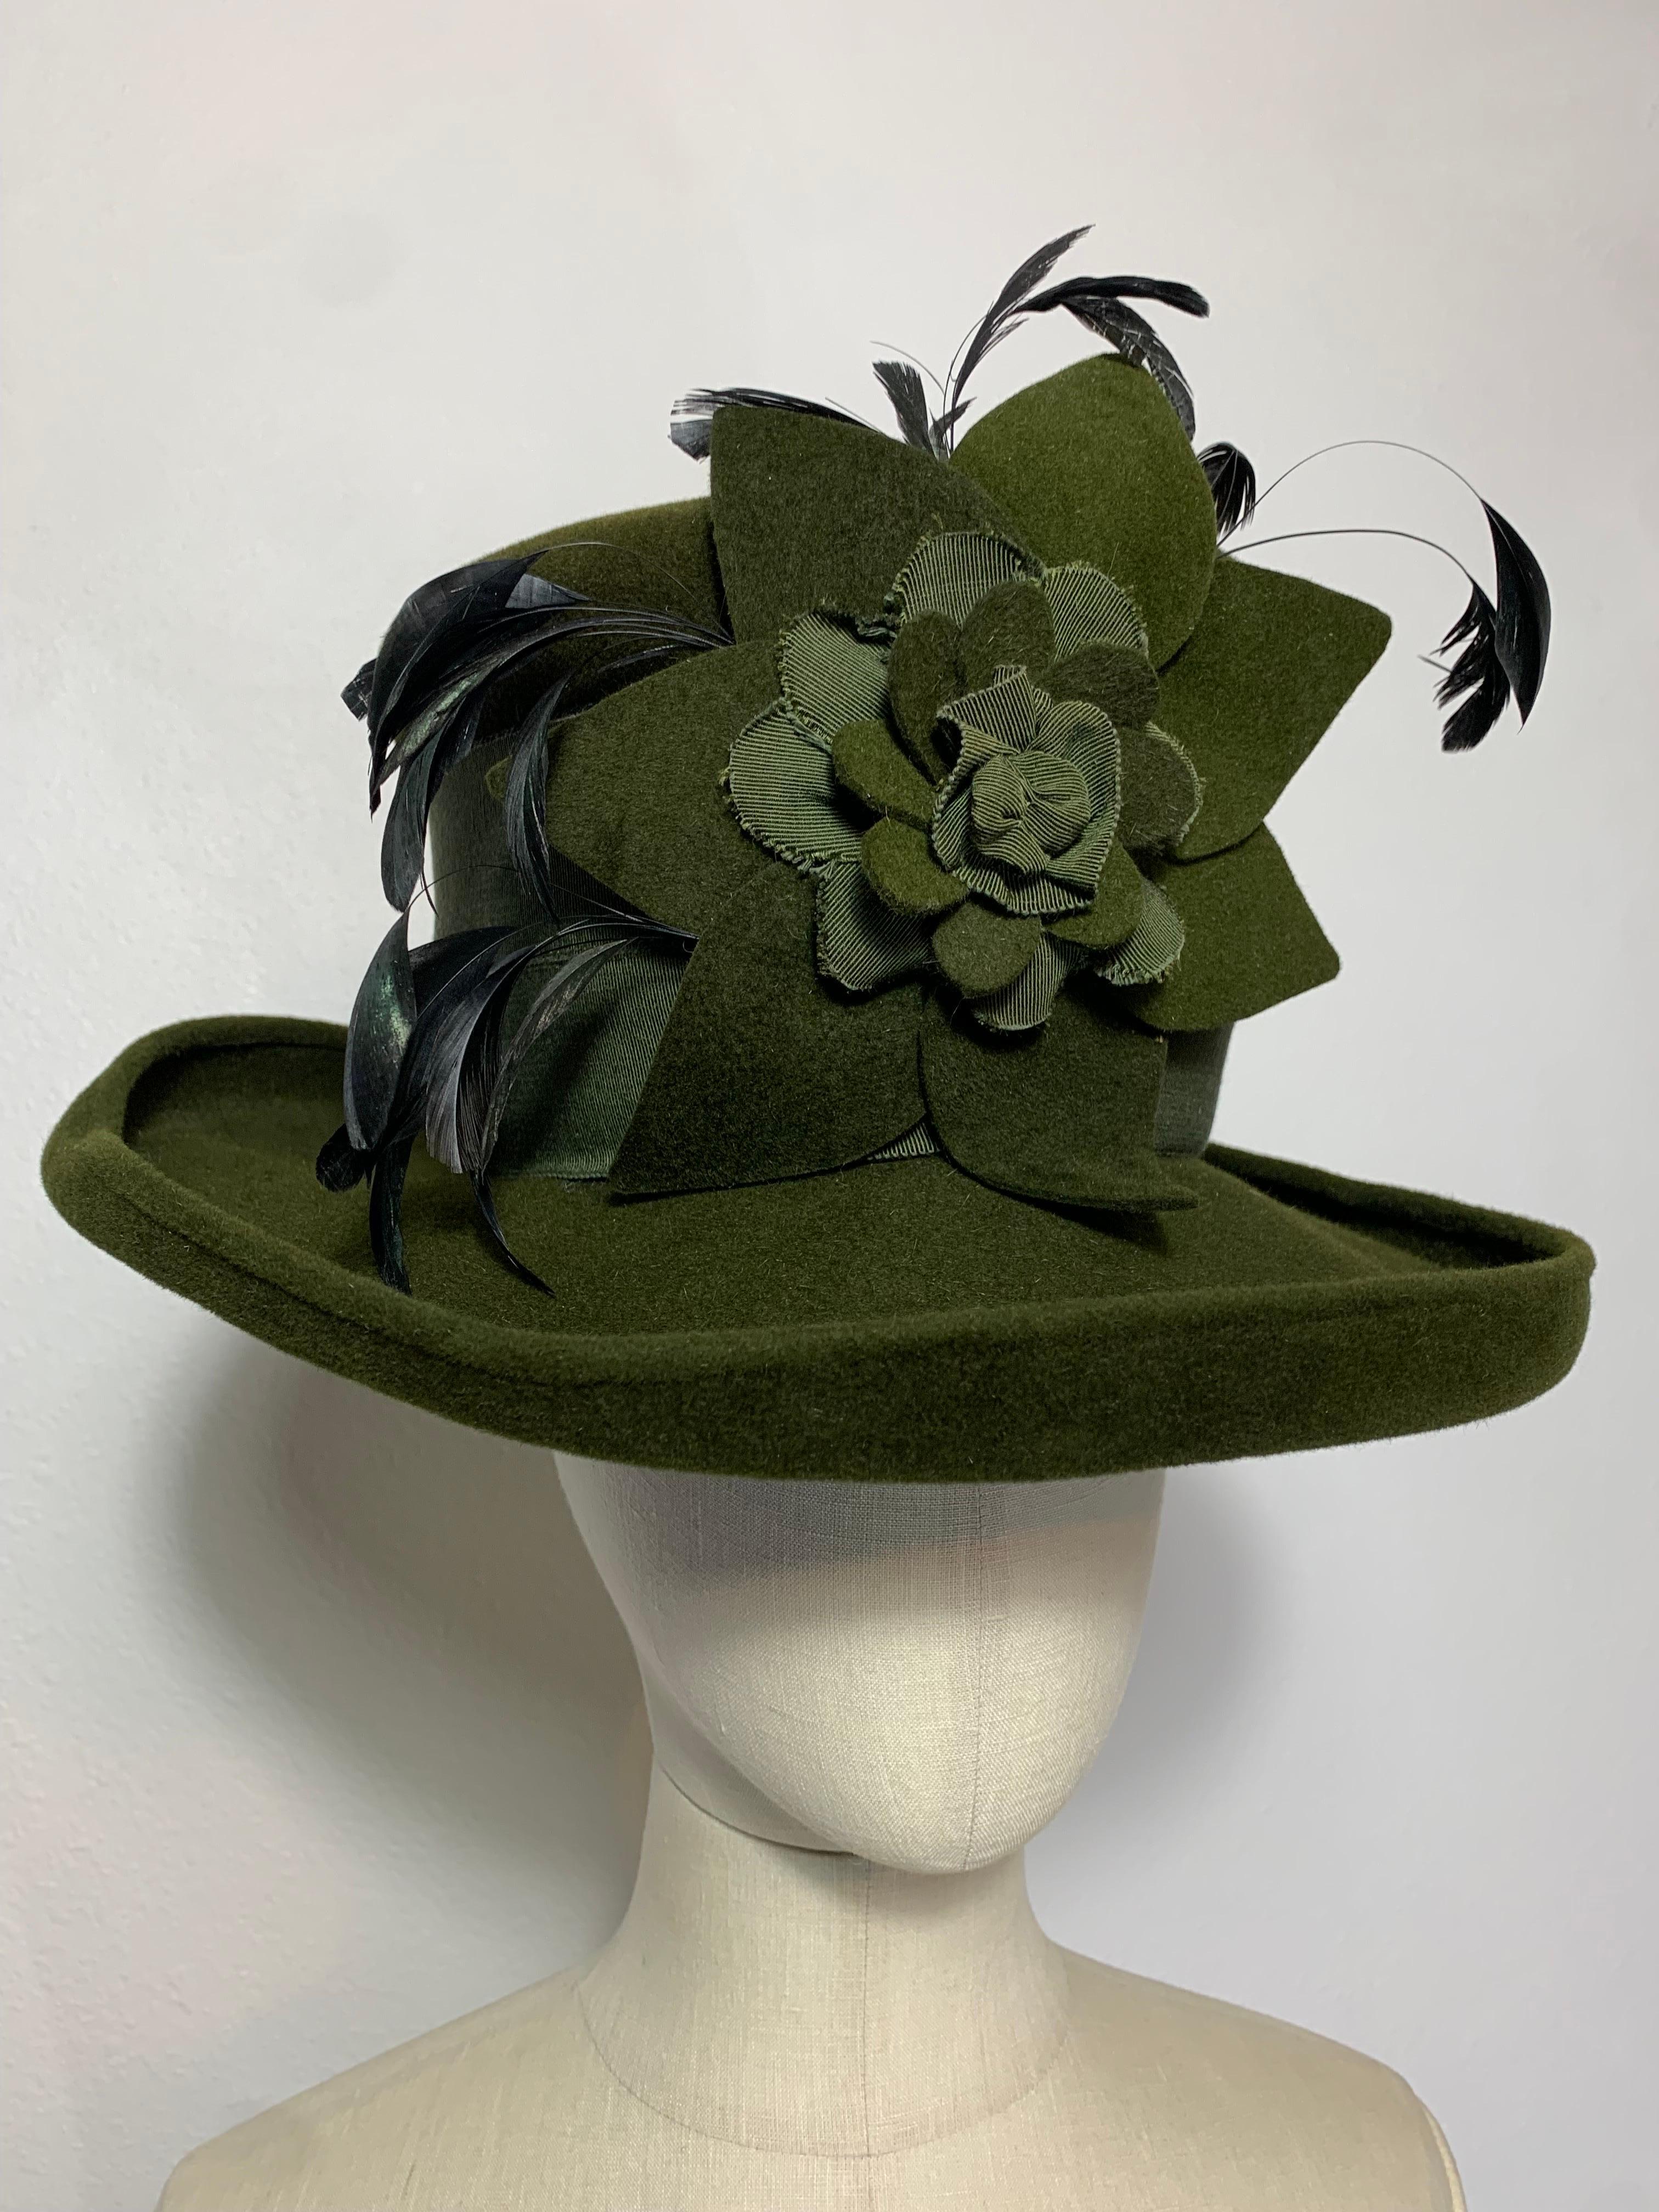 Maison Michel Autumn/Winter Medium Turned-Up Brim Olive Green Felt  Beautifully Blocked High Top Hat with Matching Flower, Feathers and Wide Grosgrain Band: Unlabeled, with attached combs for securing. Size 7 Medium. Made in France. 

Please visit